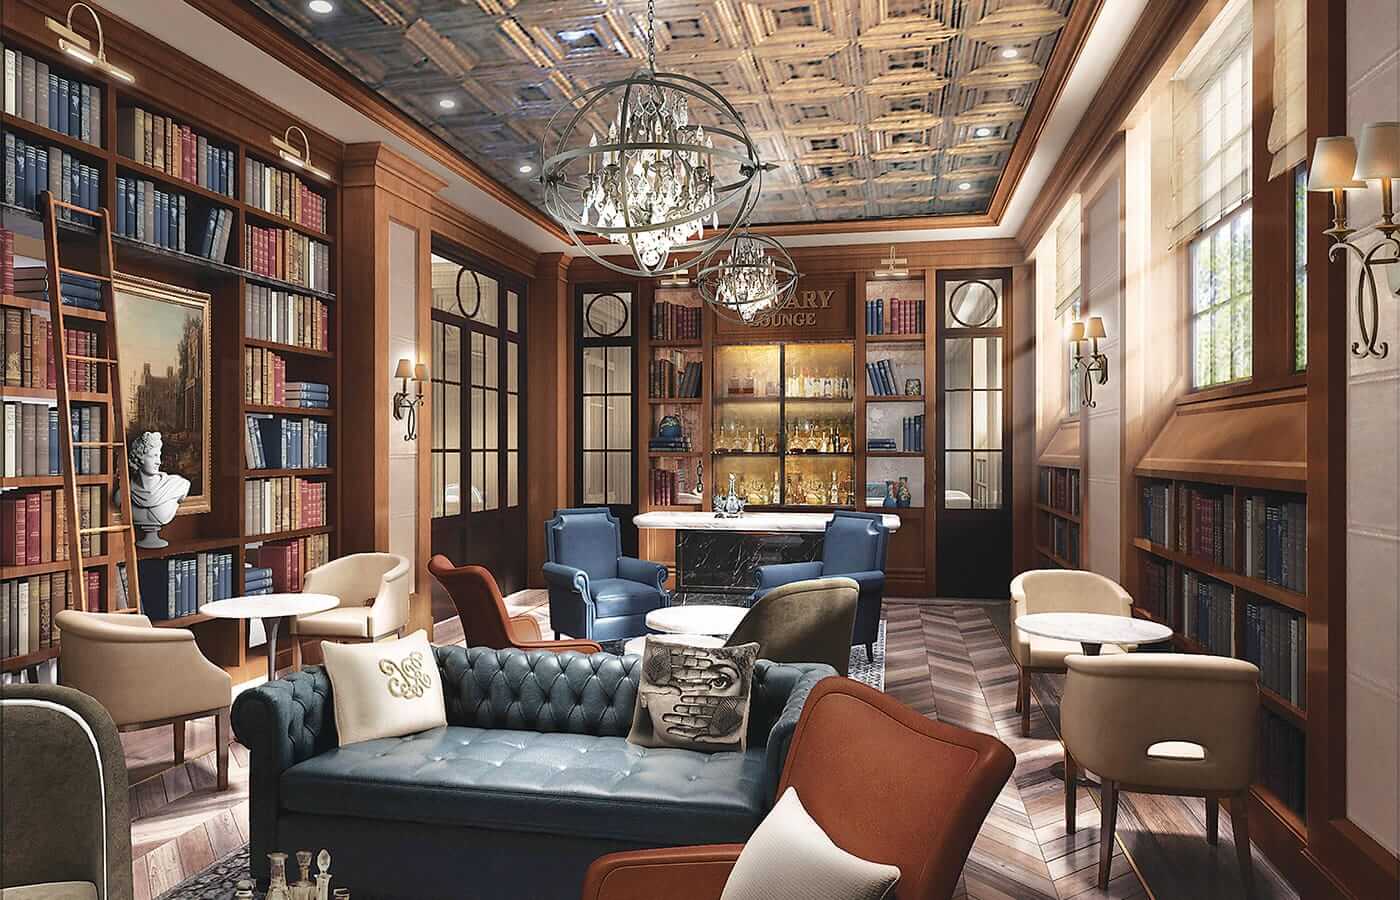 The indoor library and wine bar found within the walls of The Watermark at Brooklyn Heights showcasing a fully stocked bar, numerous books and a variety of seating.